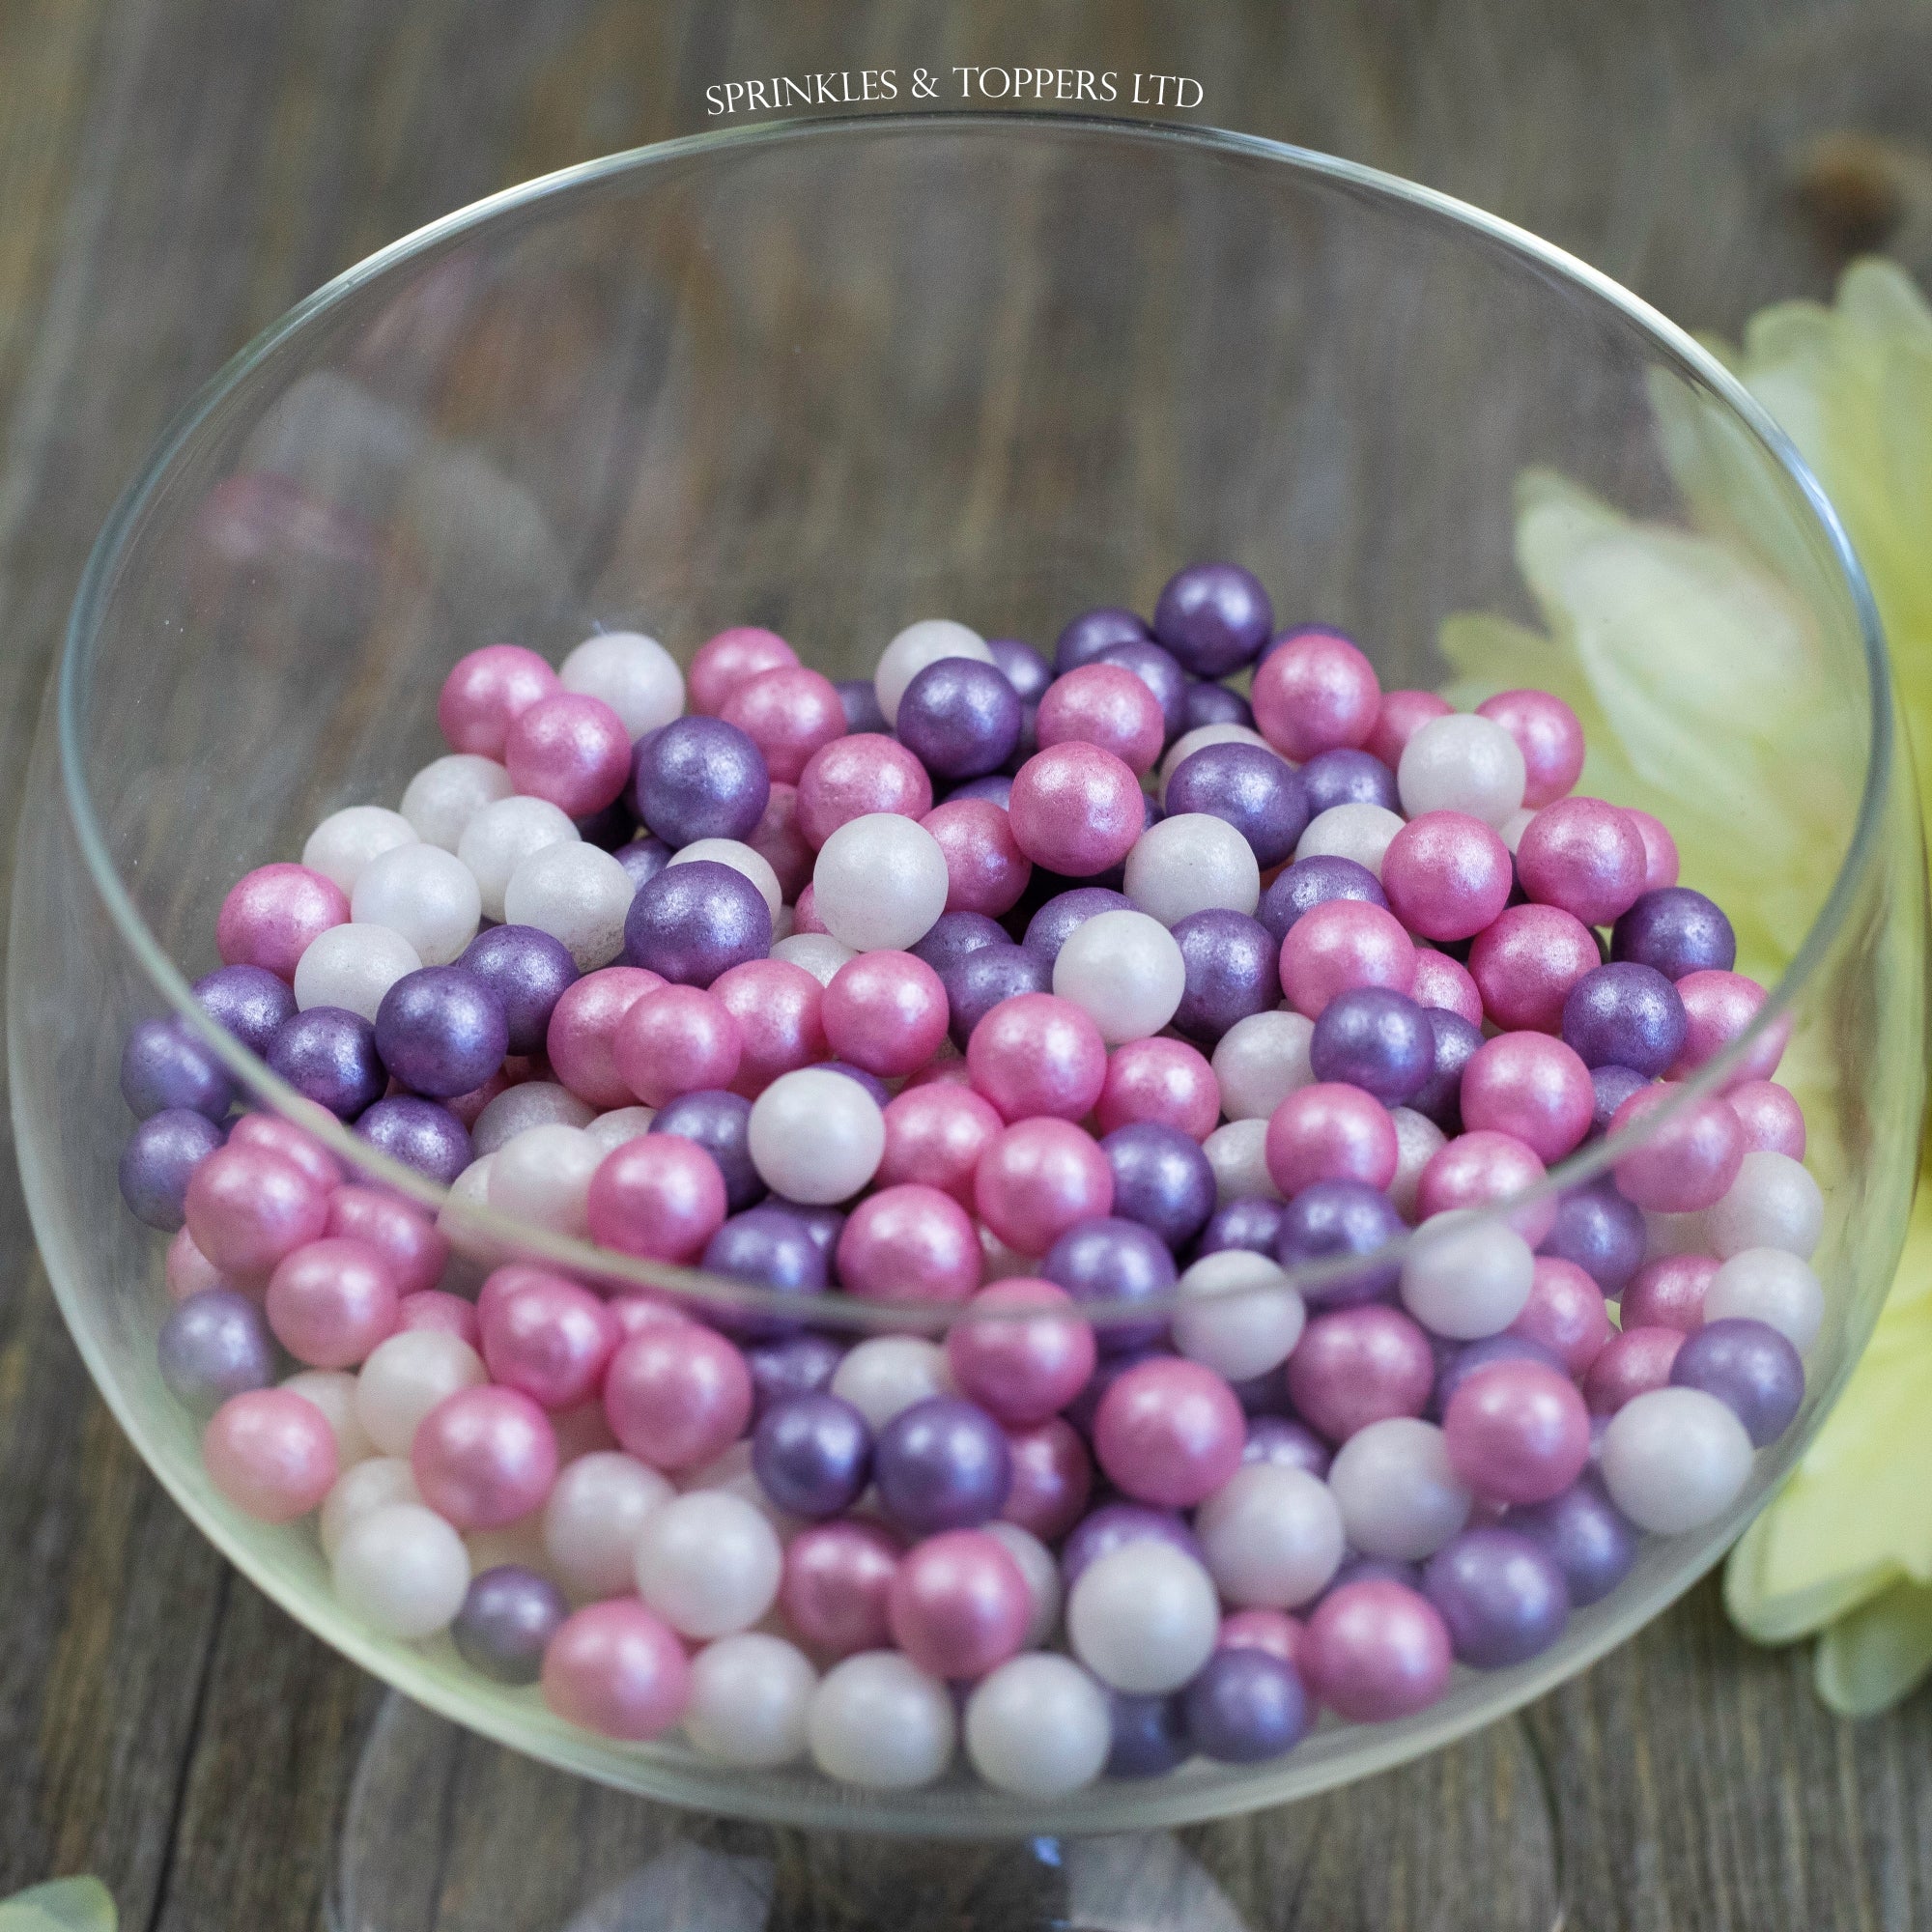 Edible Sugar Decoration Beads & Beading Pearls For Cakes Cupcakes CakePops  Light Purple 4oz